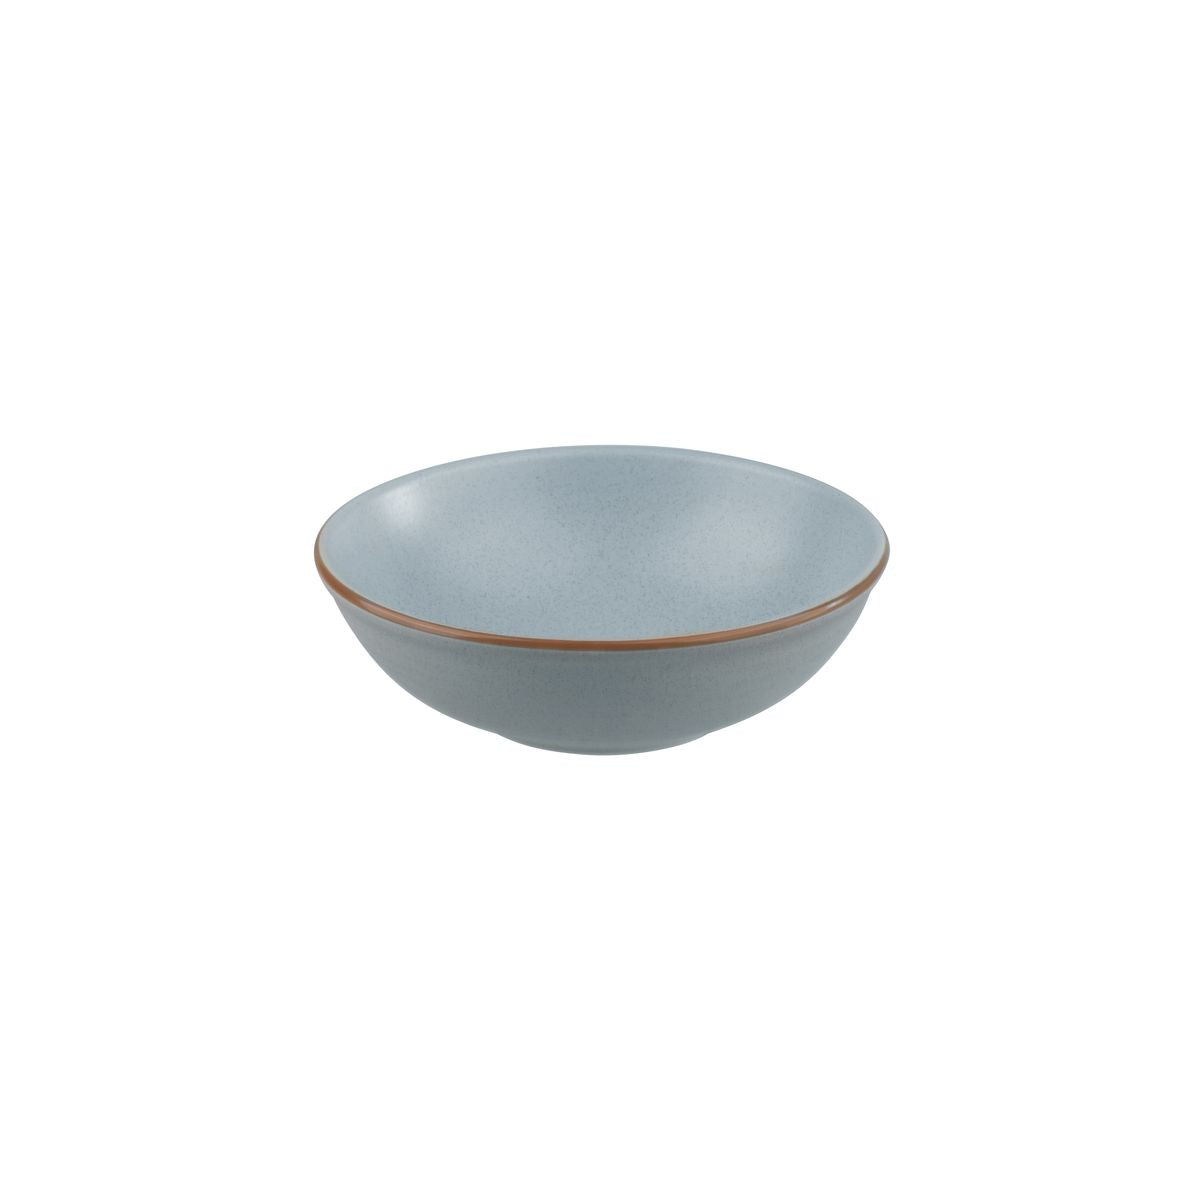 Round Bowl - 195mm, Zuma Bluestone from Zuma. made out of Ceramic and sold in boxes of 3. Hospitality quality at wholesale price with The Flying Fork! 